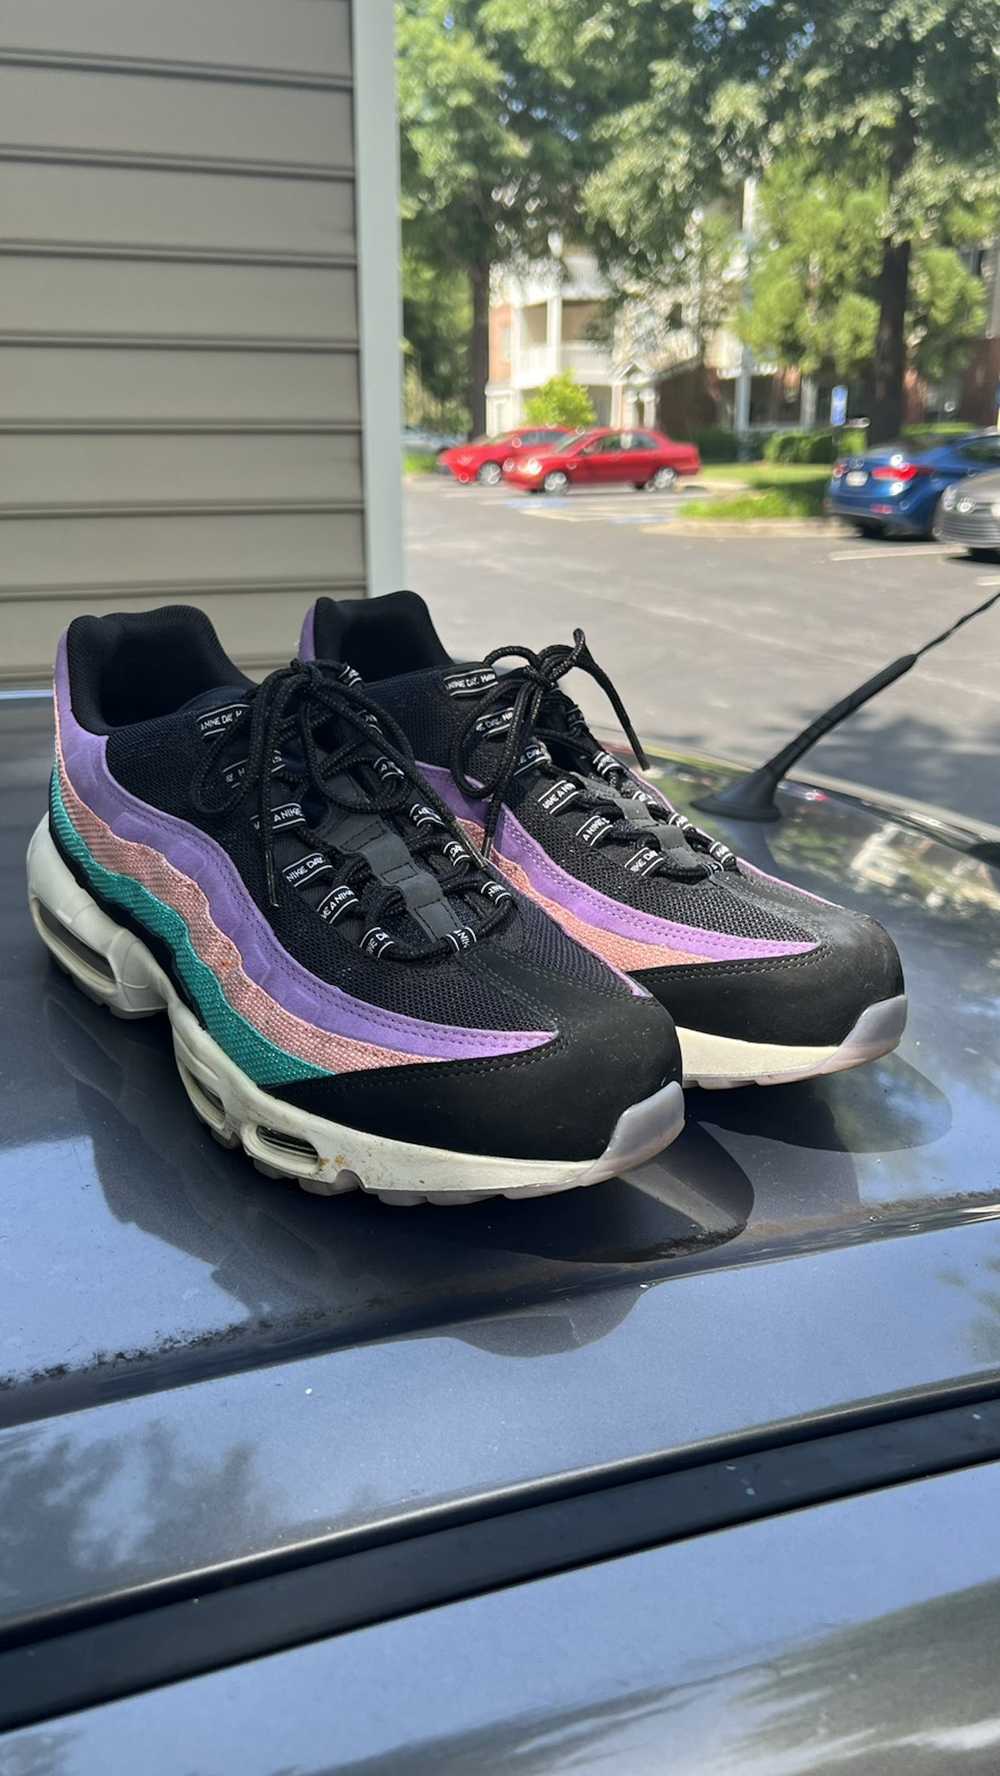 Nike × Streetwear Air Max 95 Have A Nike Day 2019 - image 1